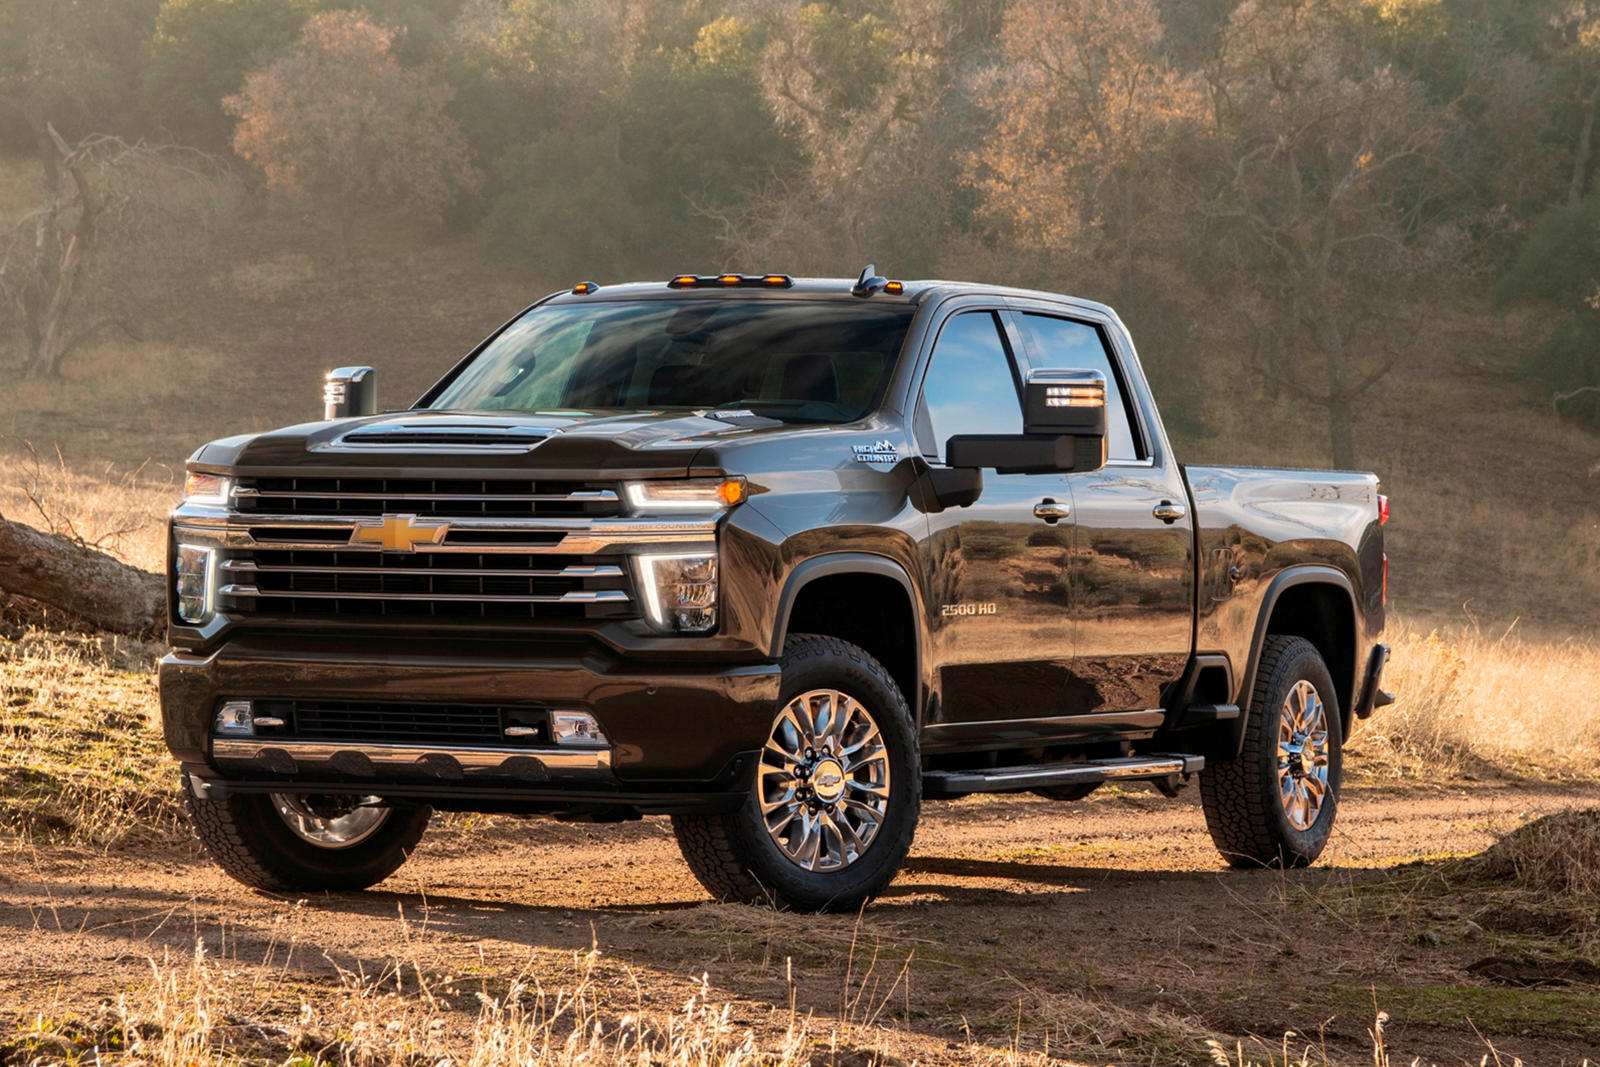 2021 Chevrolet Silverado 2500hd Review Trims Specs Price New Interior Features Exterior Design And Specifications Carbuzz